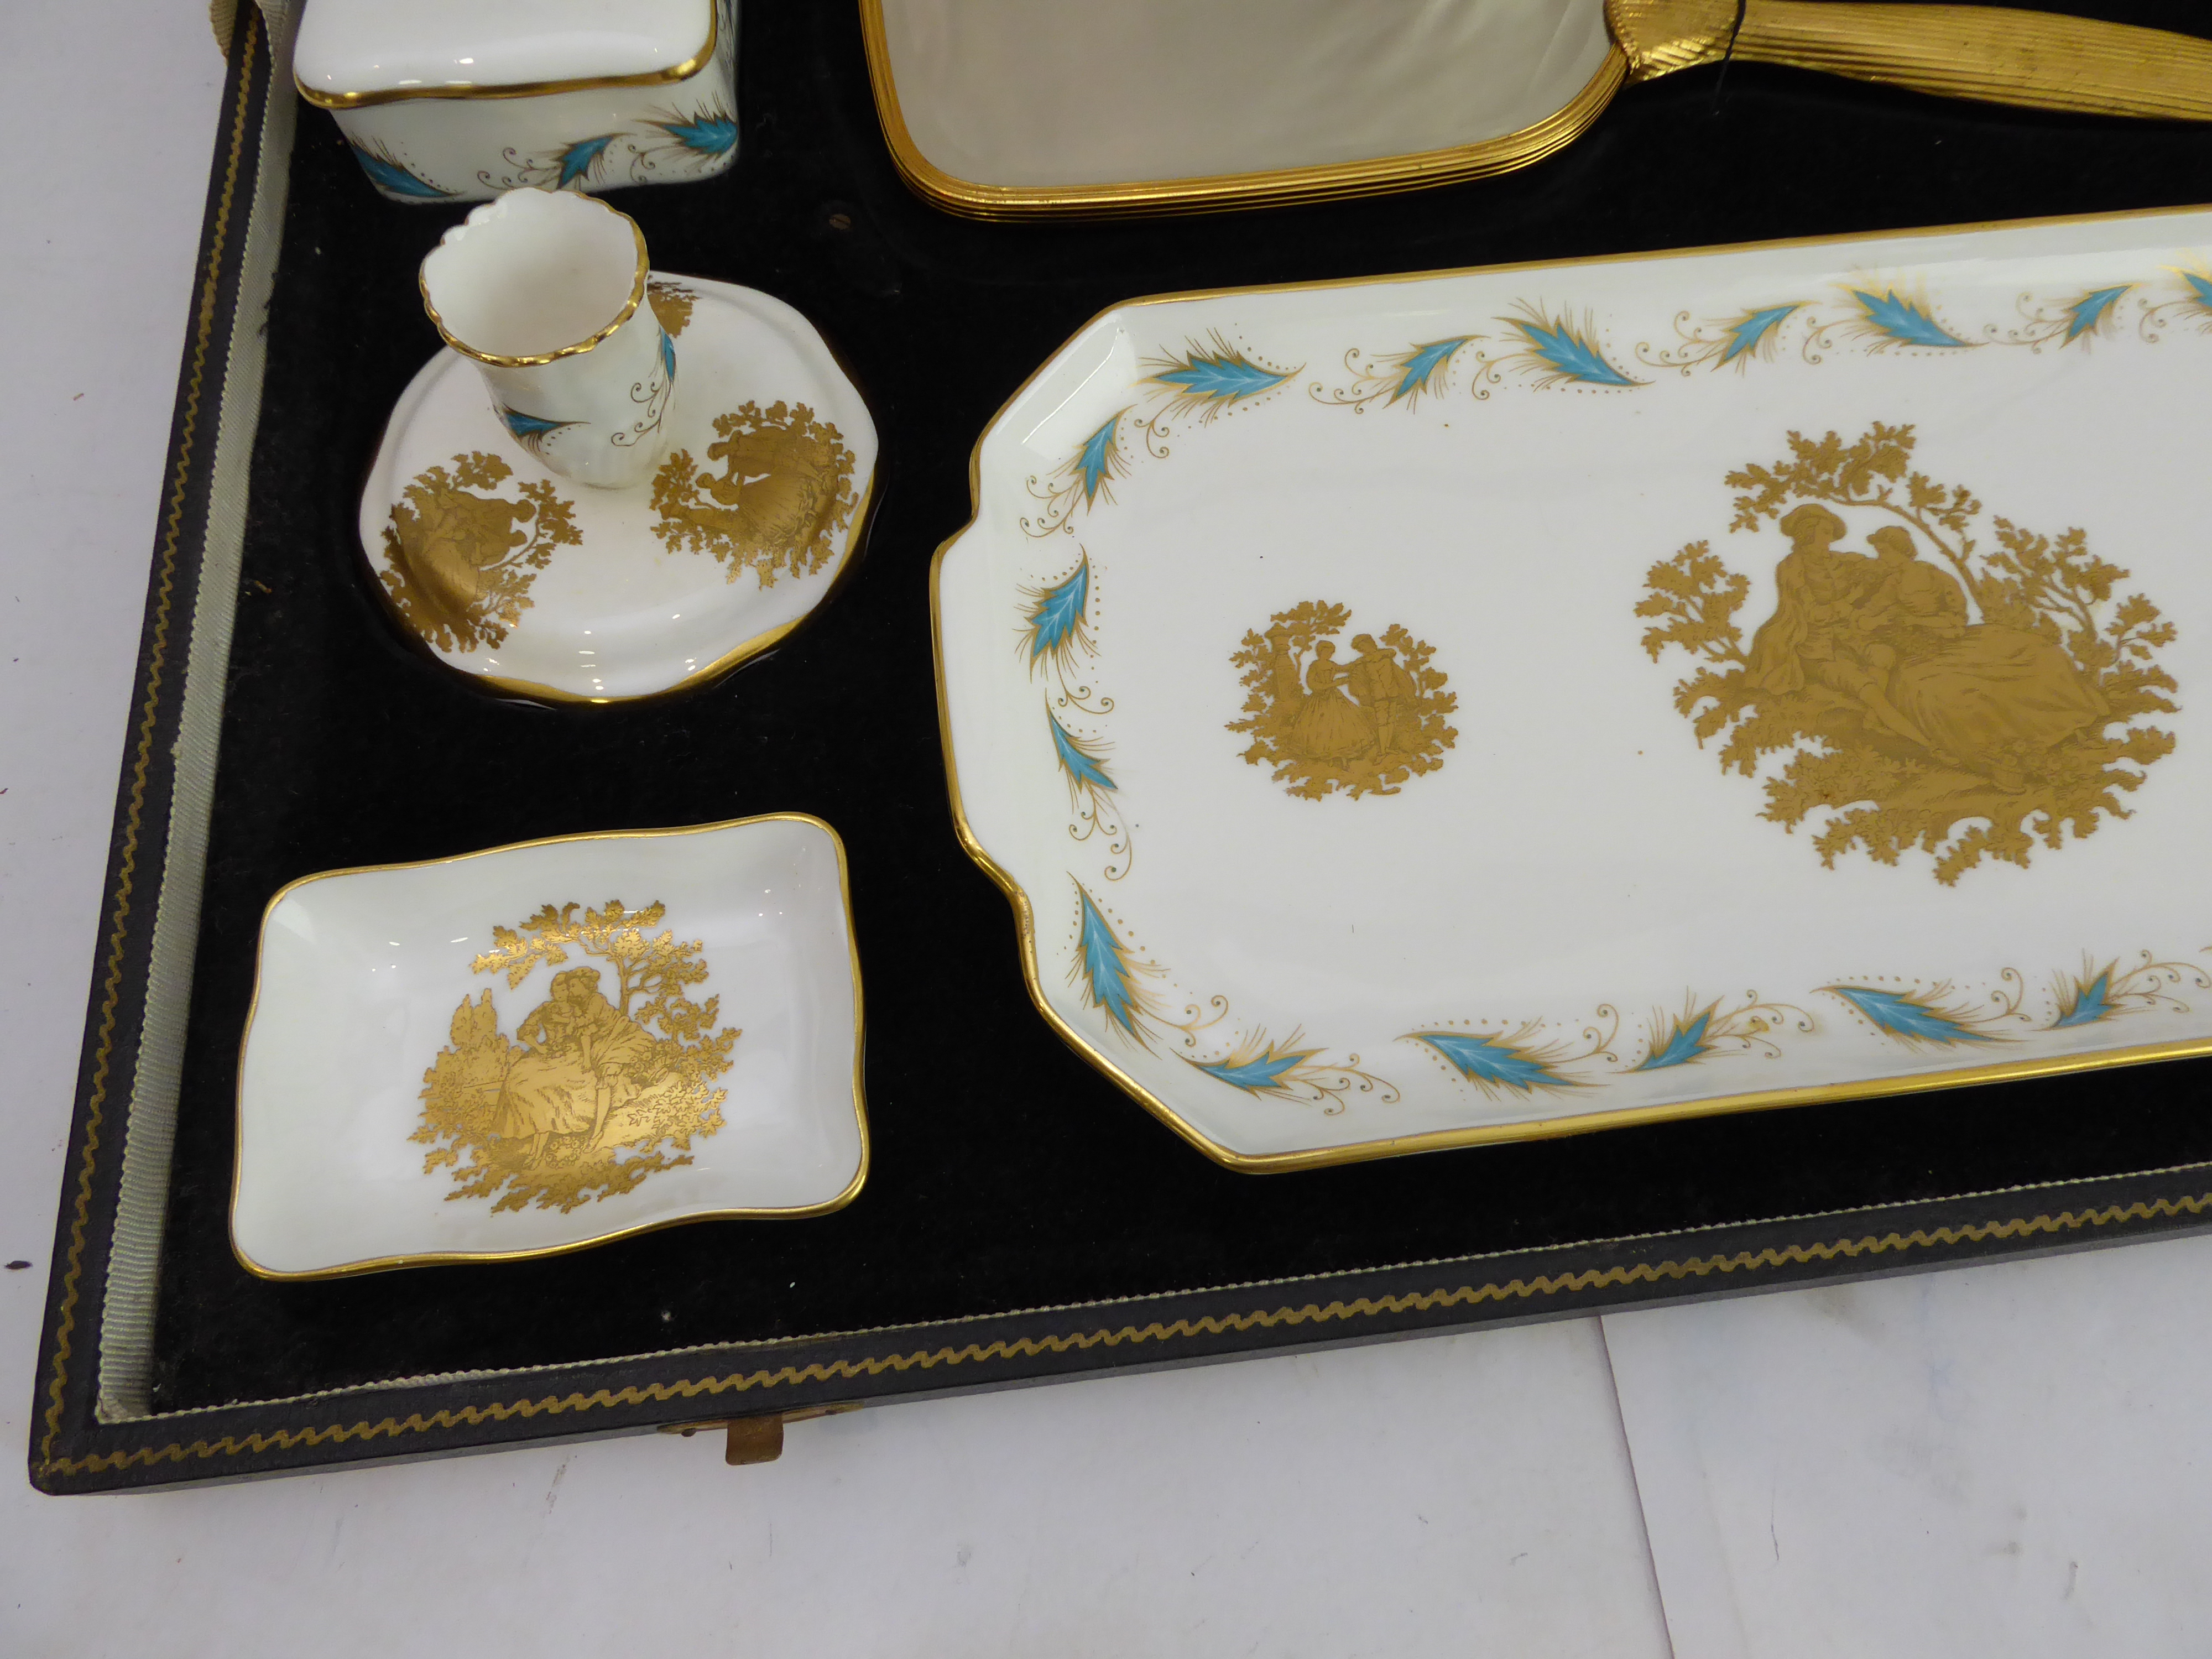 A fine ten-piece bone china dressing-table set by the Crown Staffordshire China Co. Ltd. In its - Image 4 of 5